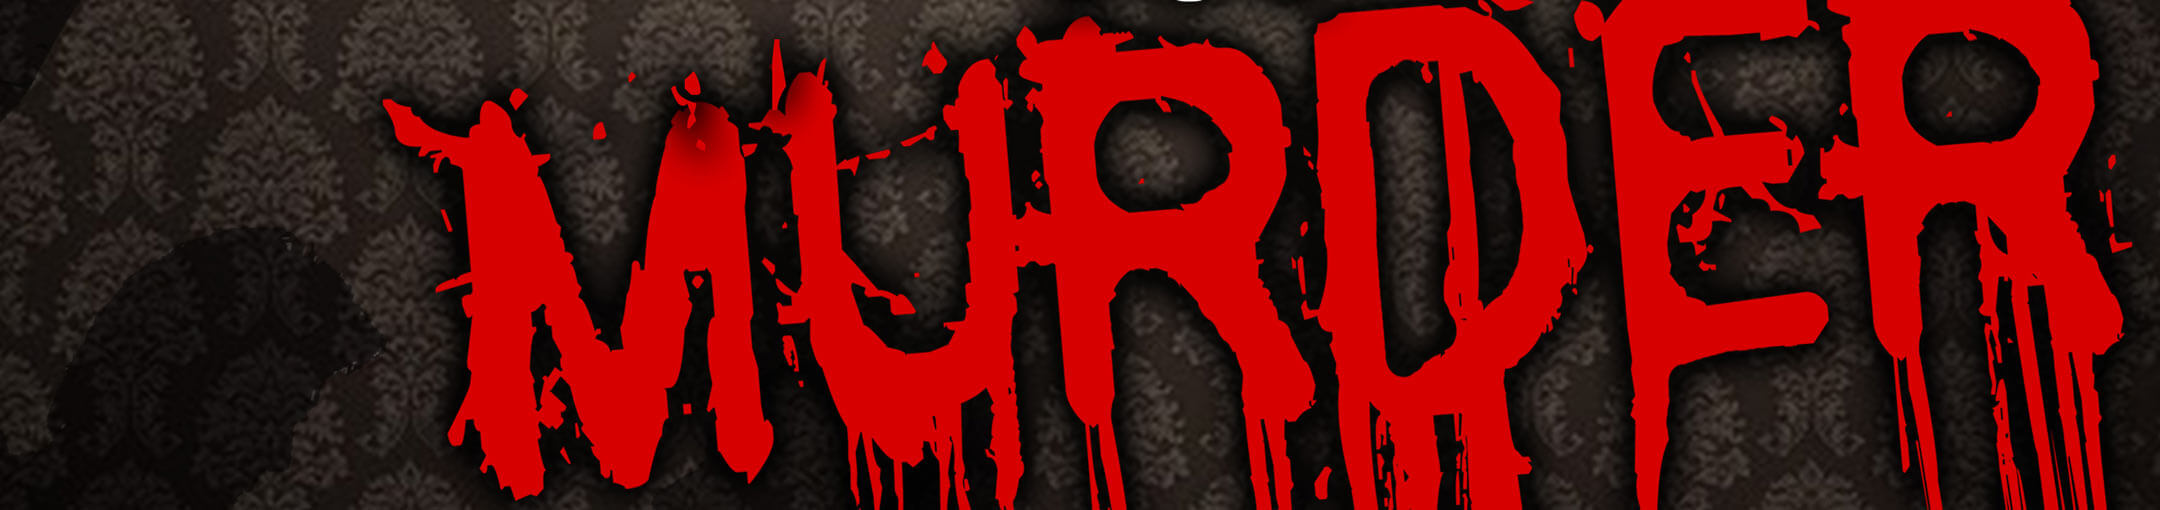 Text that is stylized to look like blood that reads: "Murder".